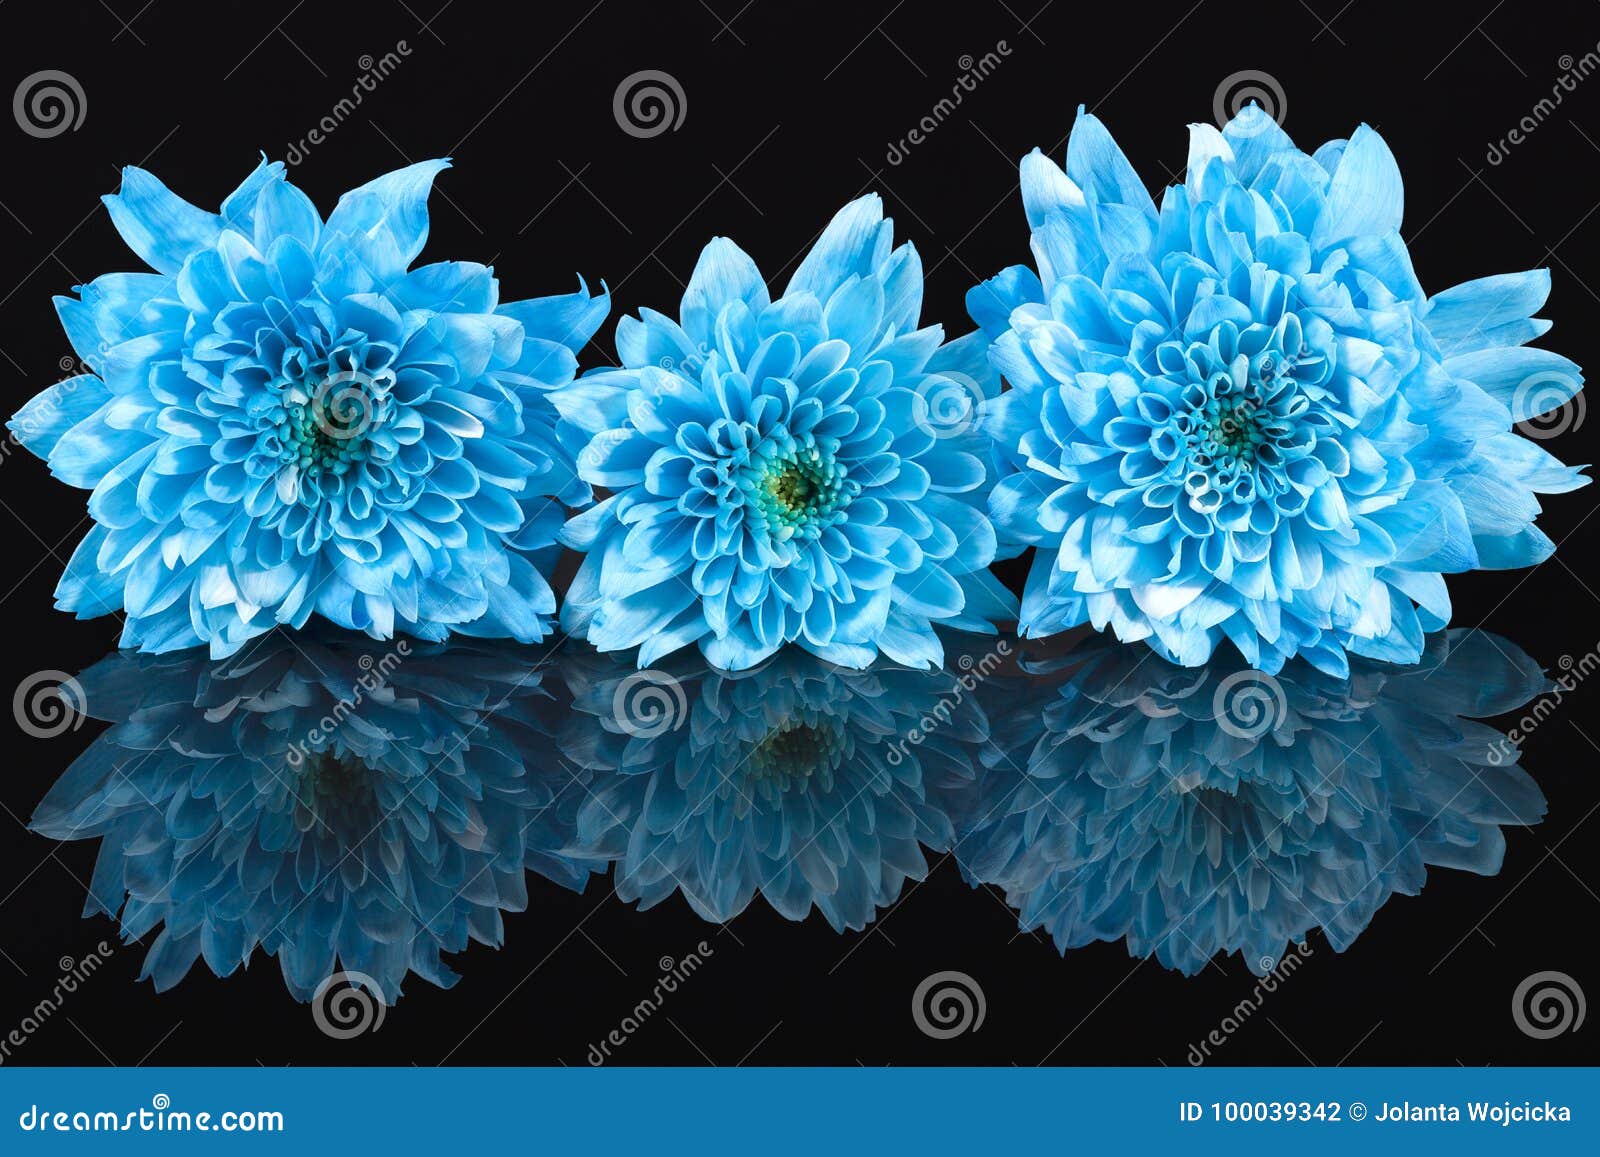 Blue Color Chrysanthemum Flowers on Black Background, Reflection ...